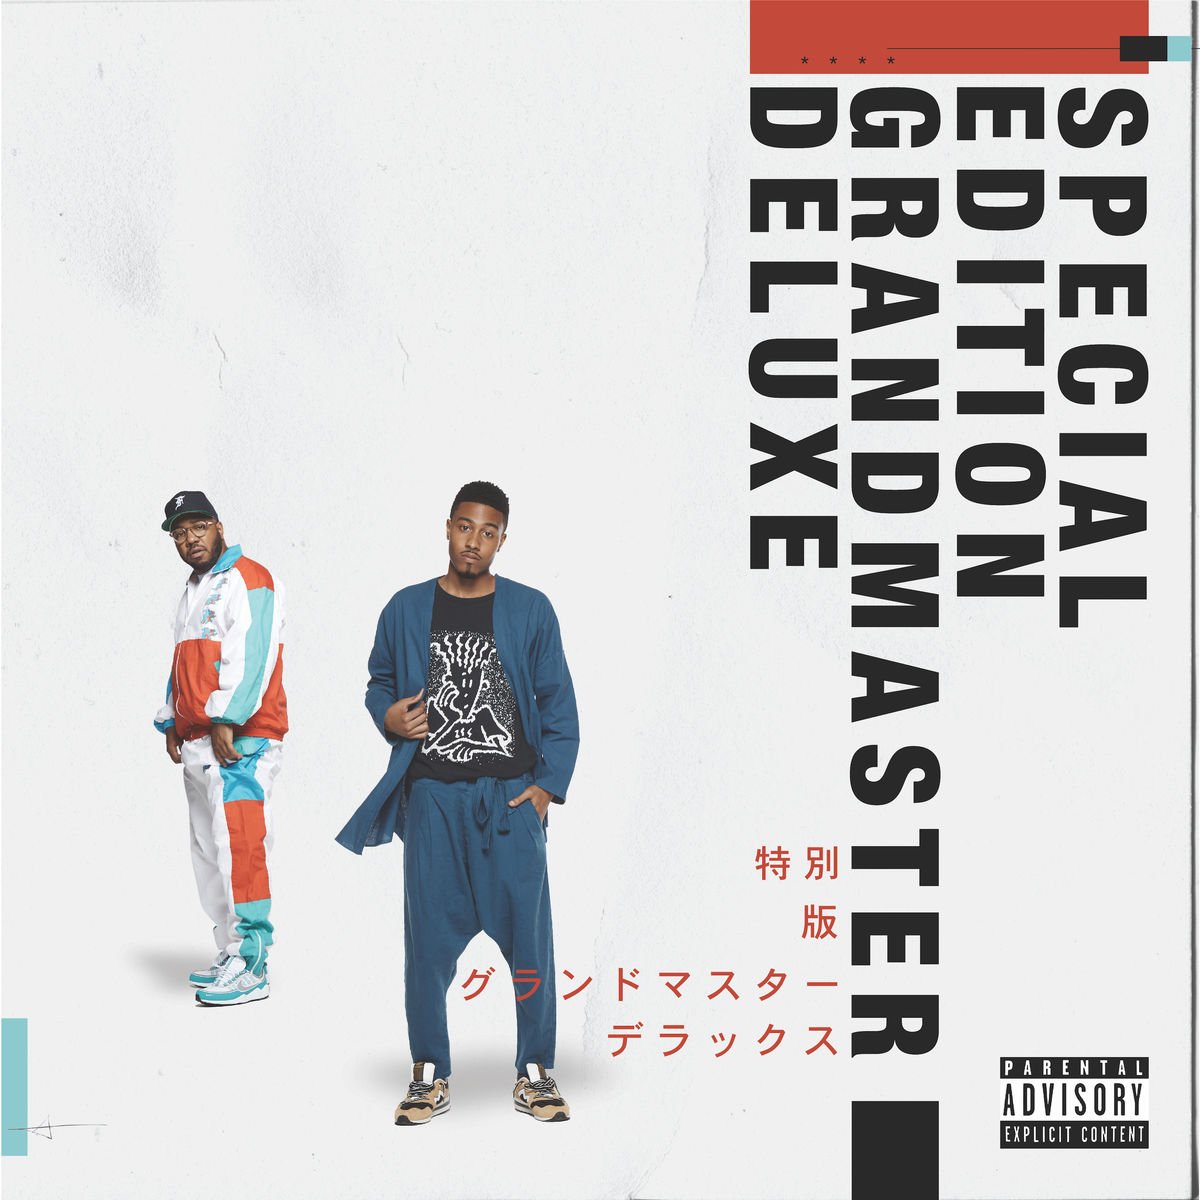 New Music: The Cool Kids – “9:15 PM” Feat. Jeremih [LISTEN]